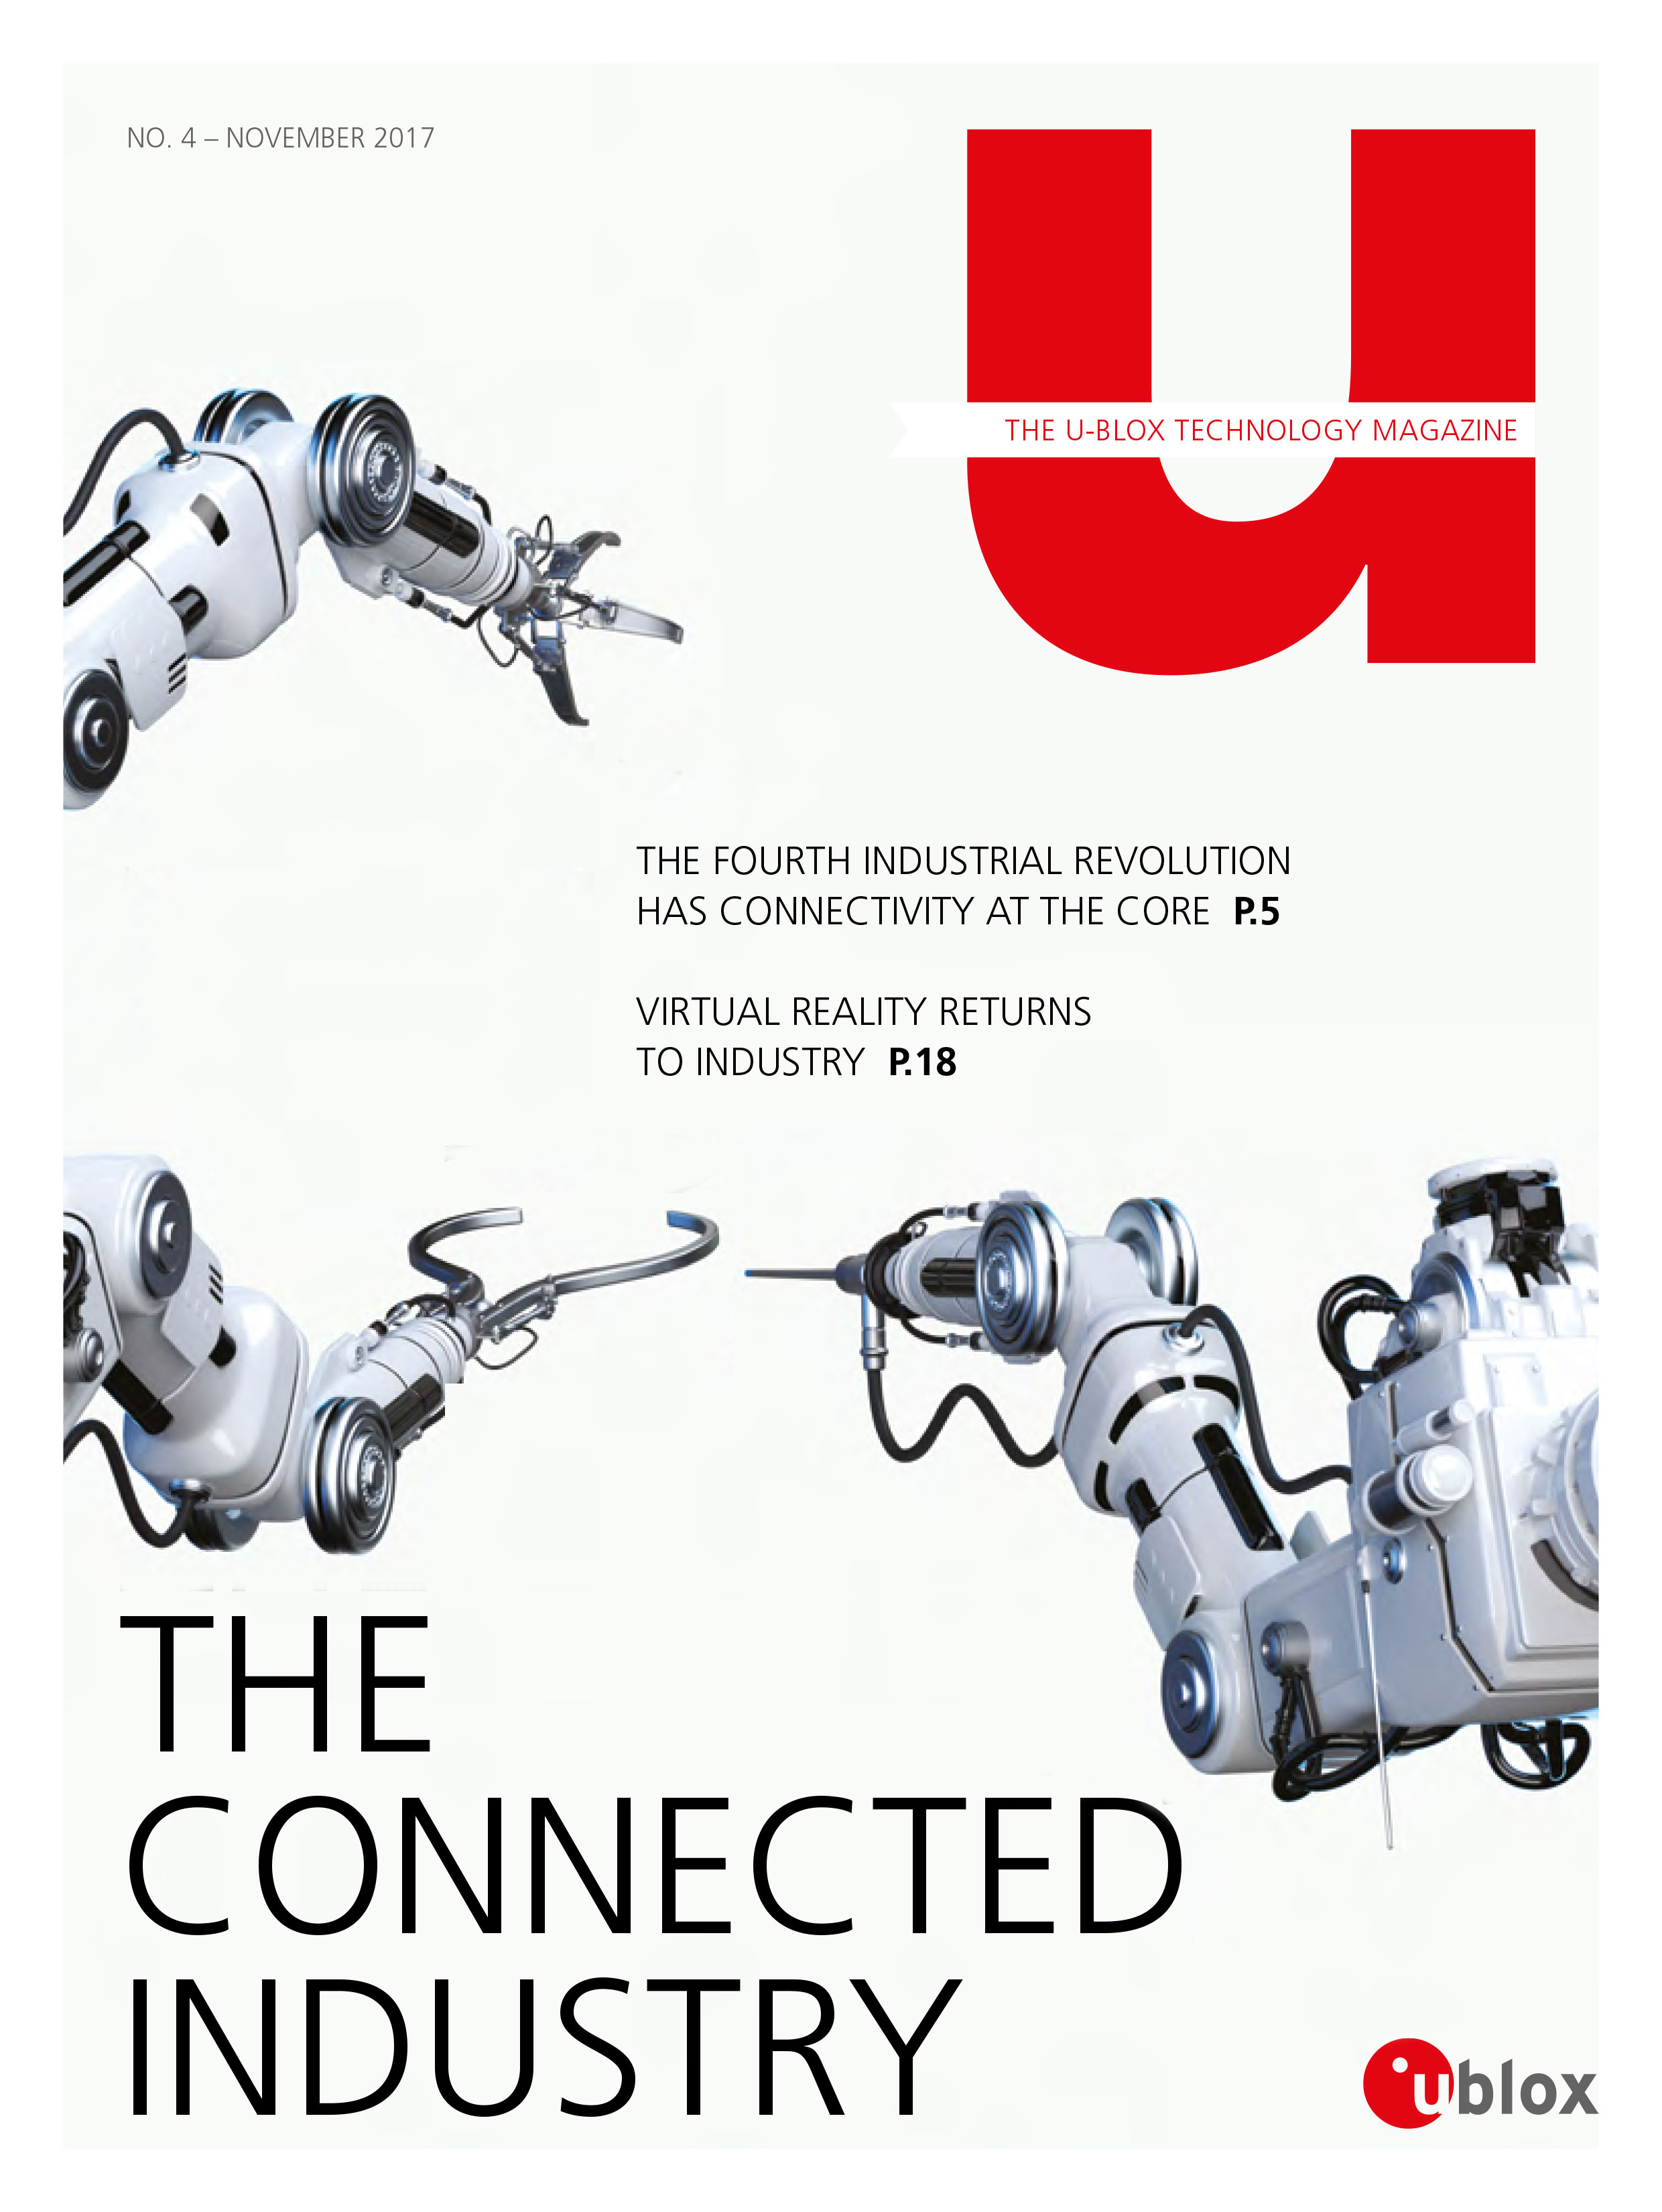 The cover of the Connected Industry Magazine